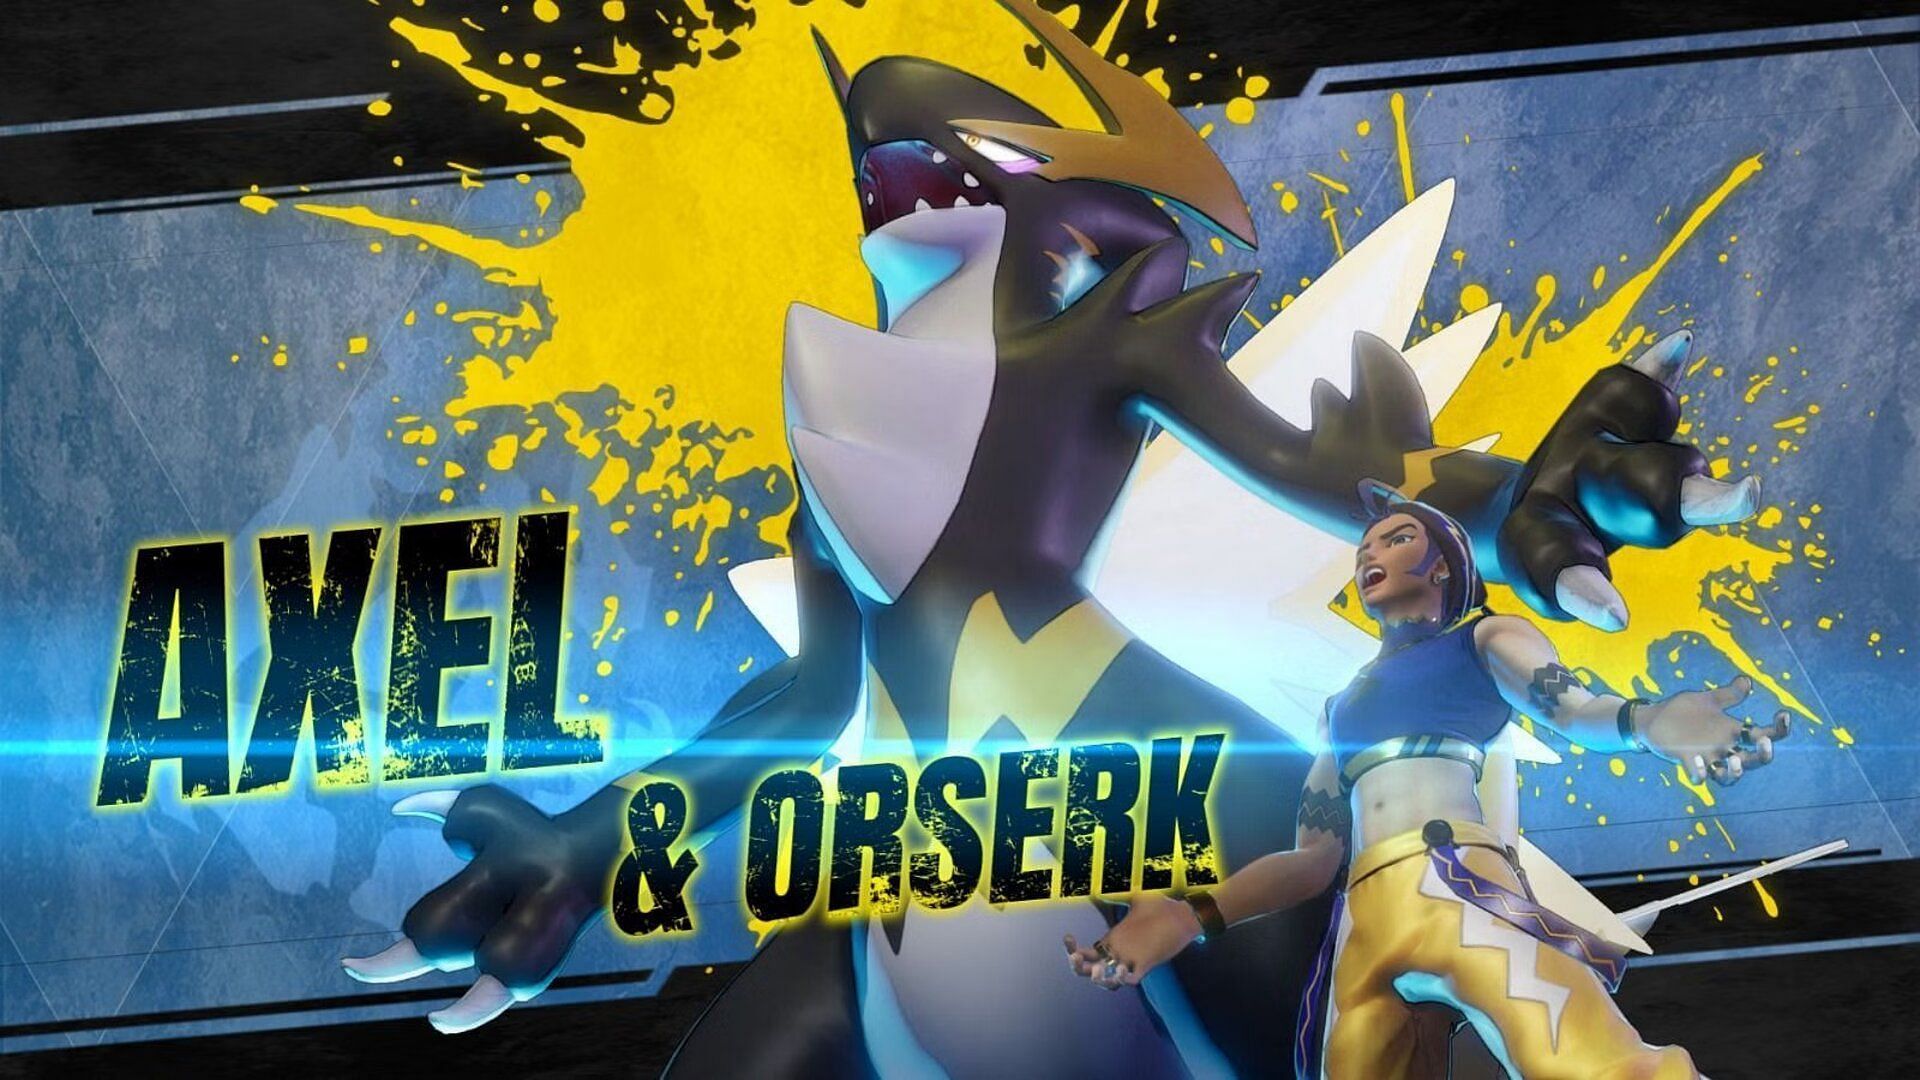 How to catch all Tower Bosses: Axel and Orserk (Image via Pocket Pair)